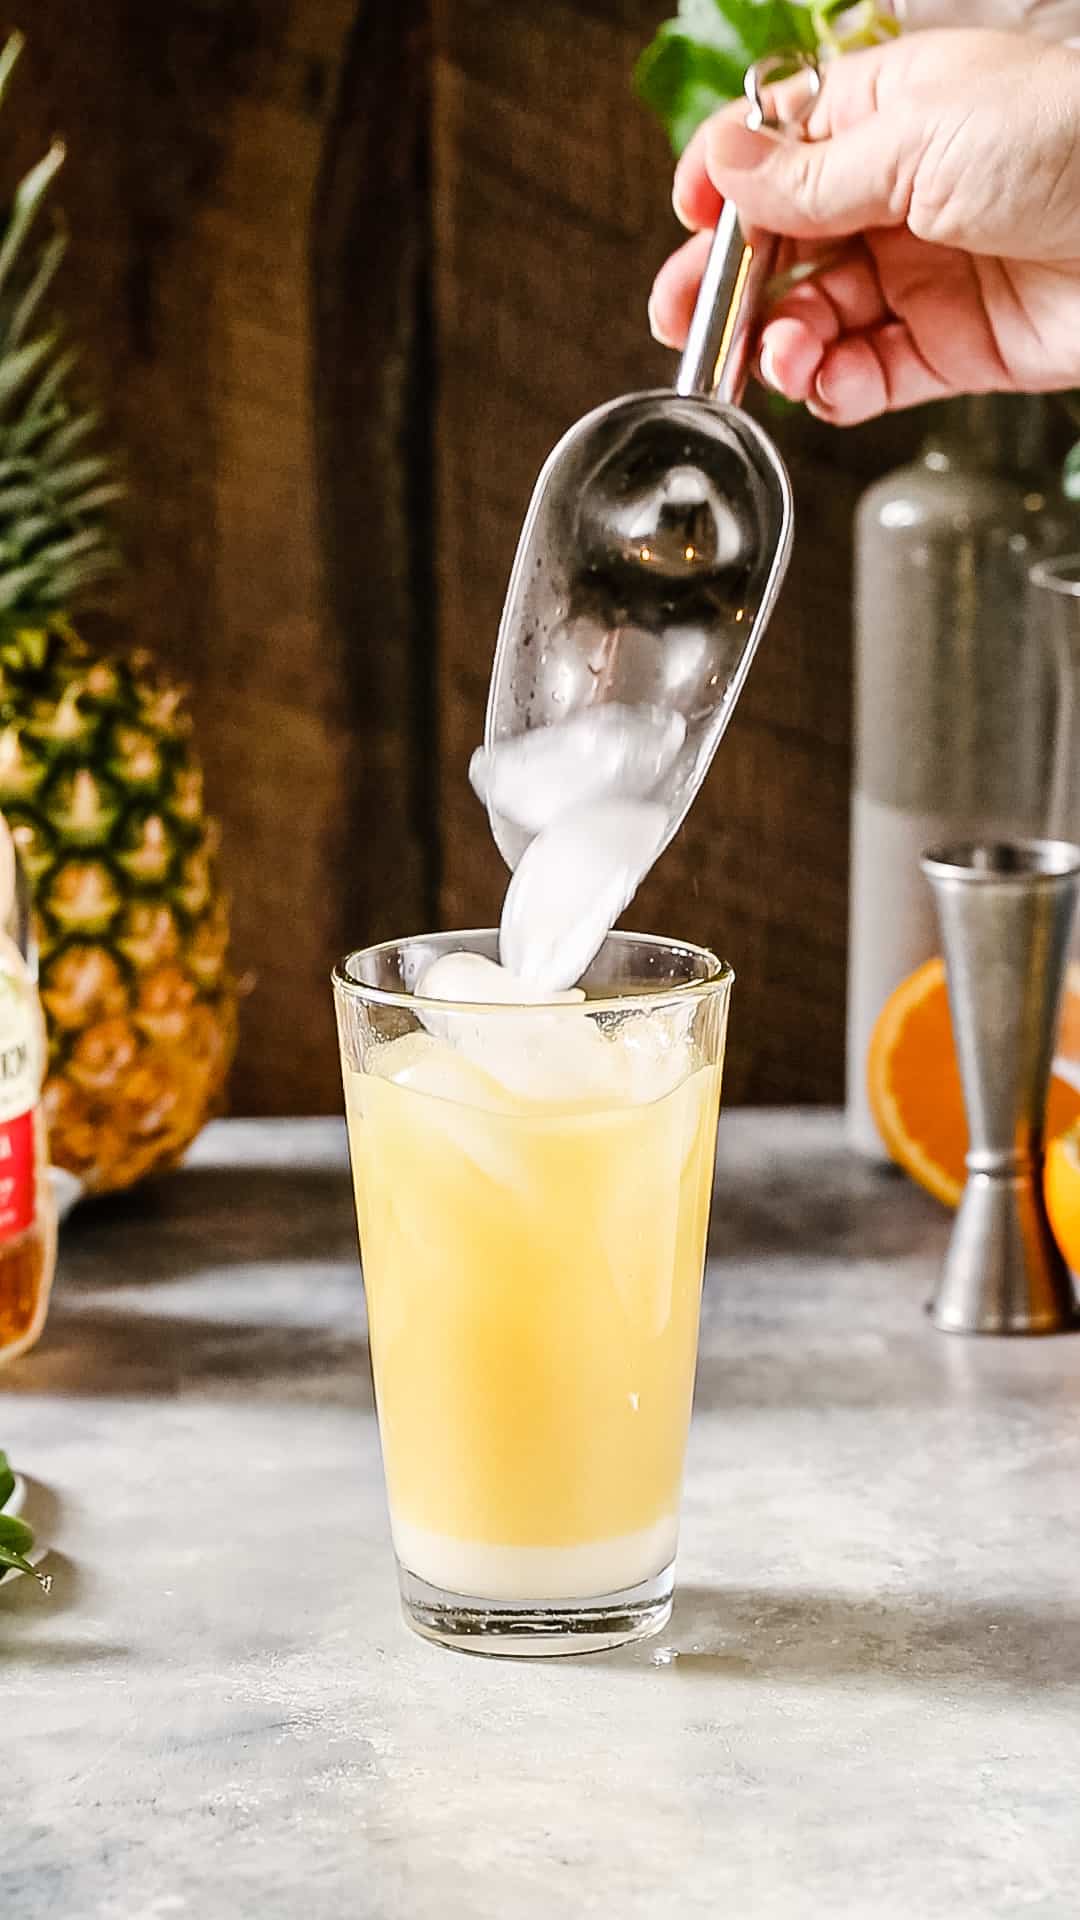 Hand using ice scoop to add ice to a glass cocktail shaker filled with yellow liquid.